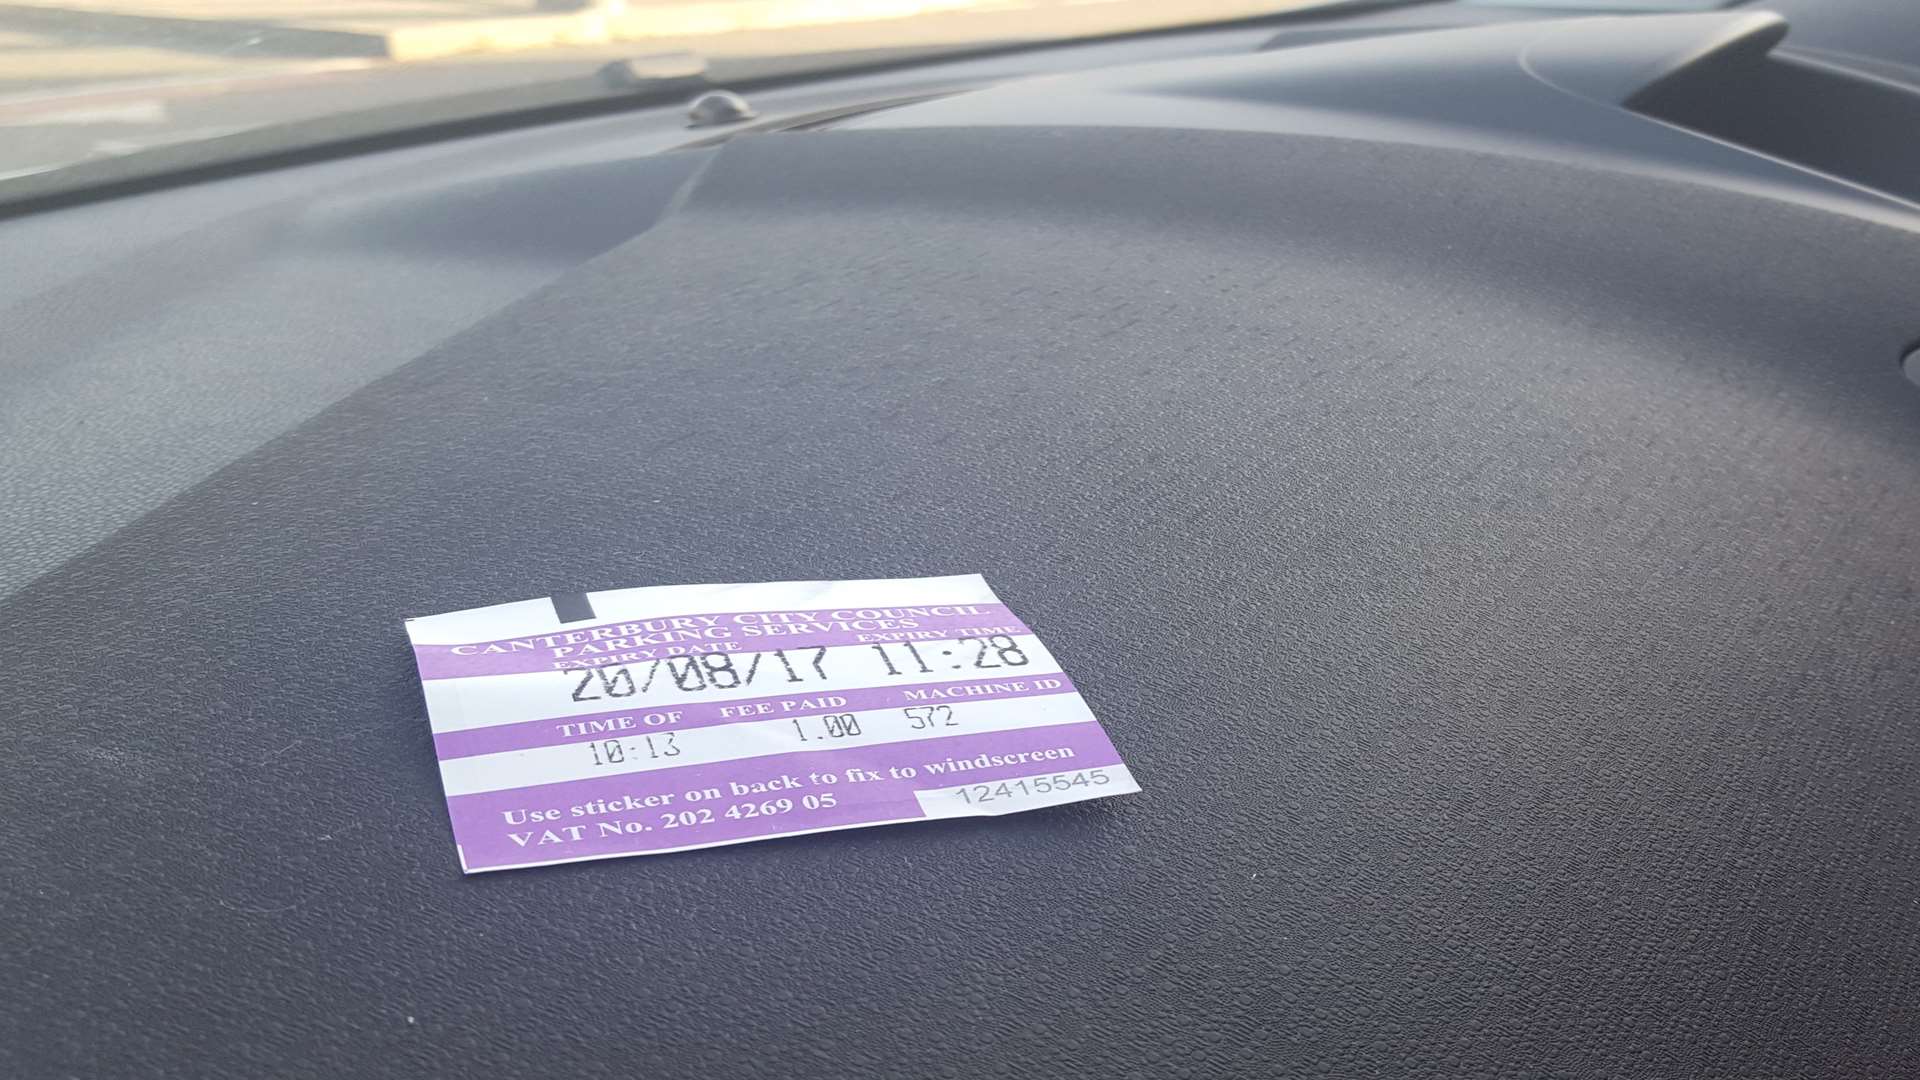 A pay-and-display parking ticket